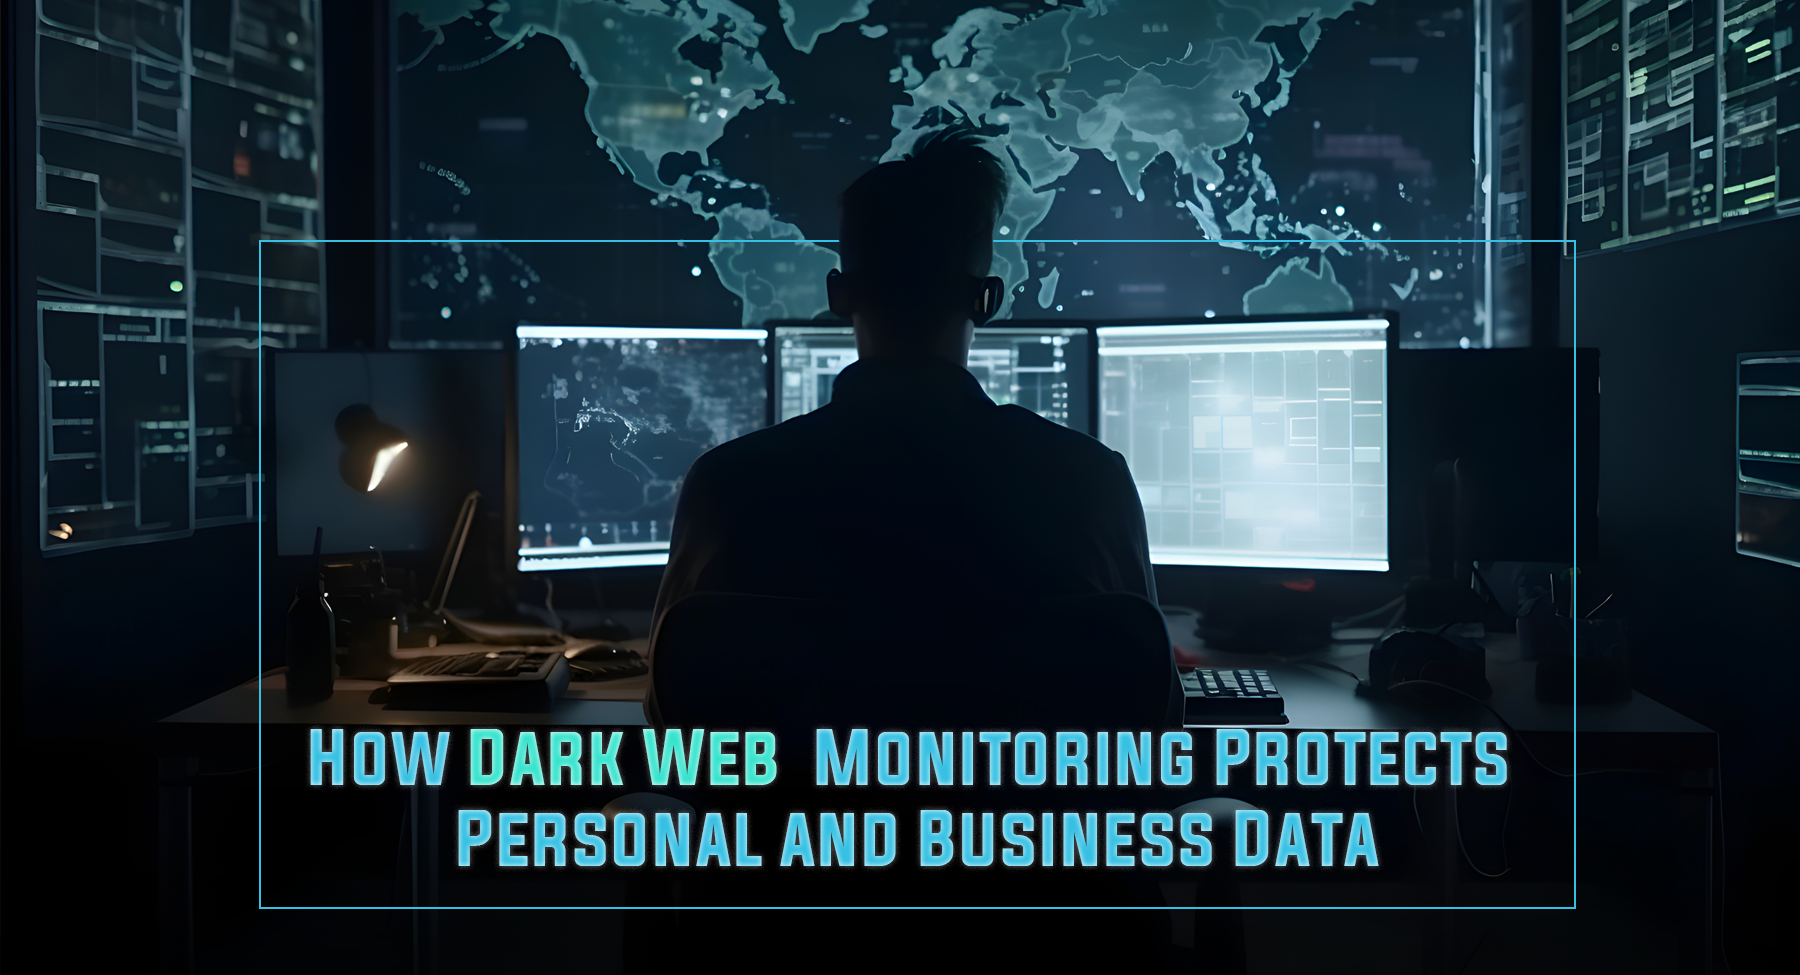 How Dark Web Monitoring Protects Personal and Business Data